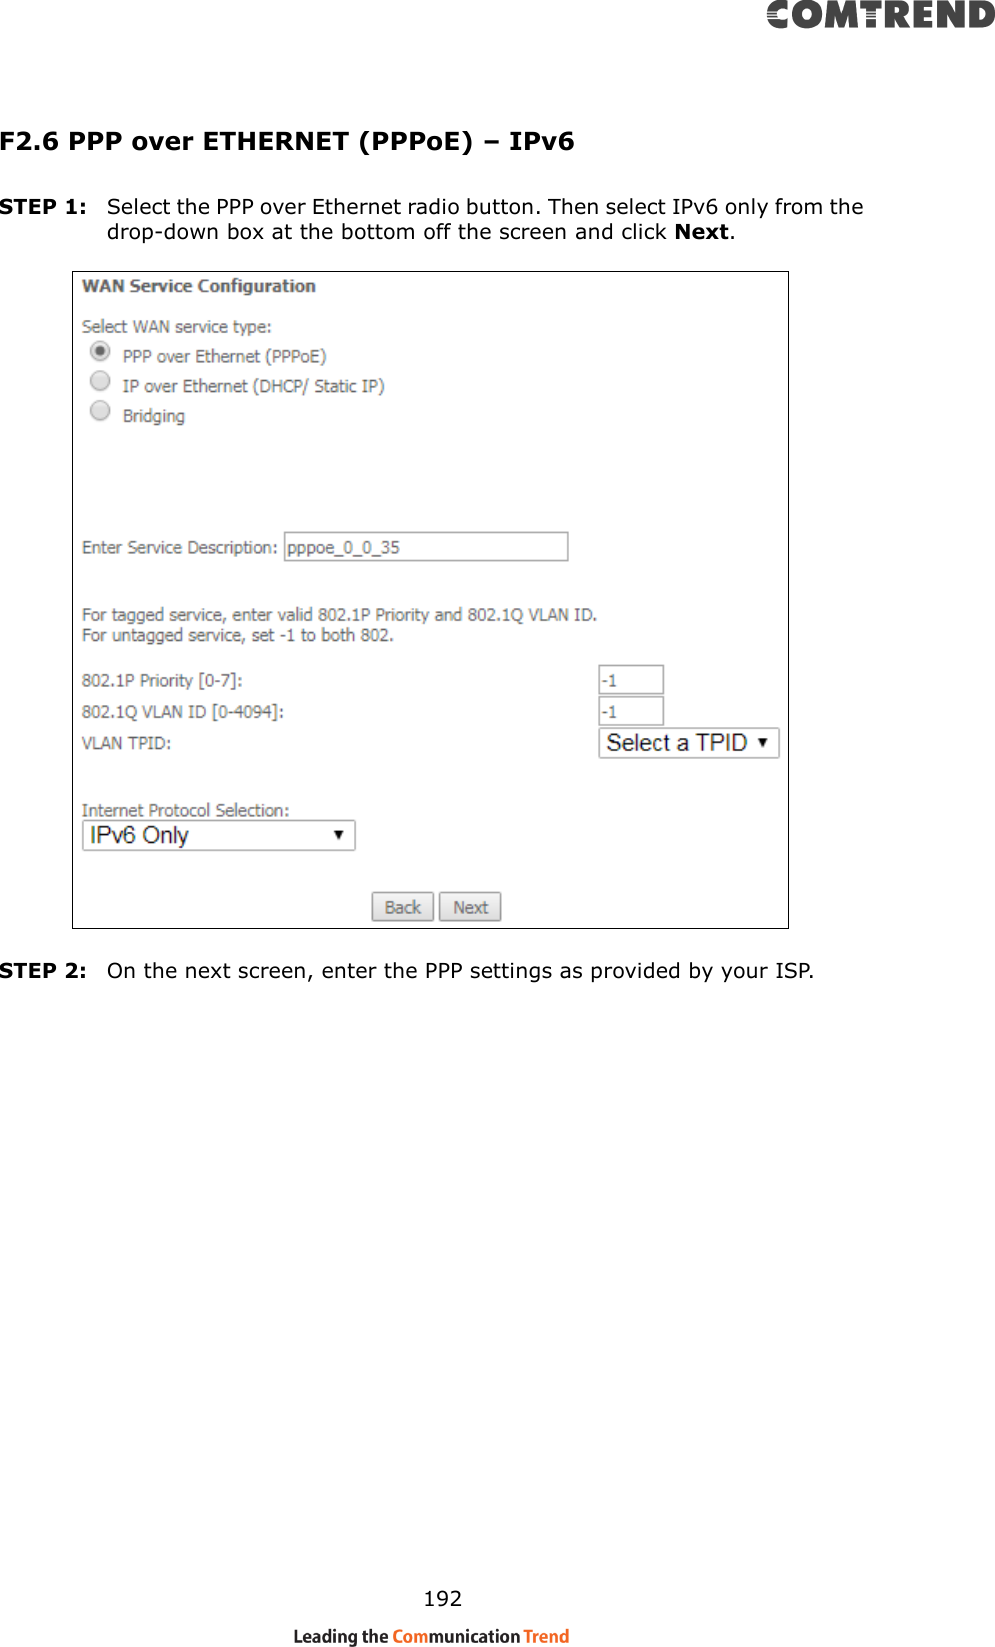    192 F2.6 PPP over ETHERNET (PPPoE) – IPv6 STEP 1:  Select the PPP over Ethernet radio button. Then select IPv6 only from the drop-down box at the bottom off the screen and click Next.    STEP 2:  On the next screen, enter the PPP settings as provided by your ISP.         